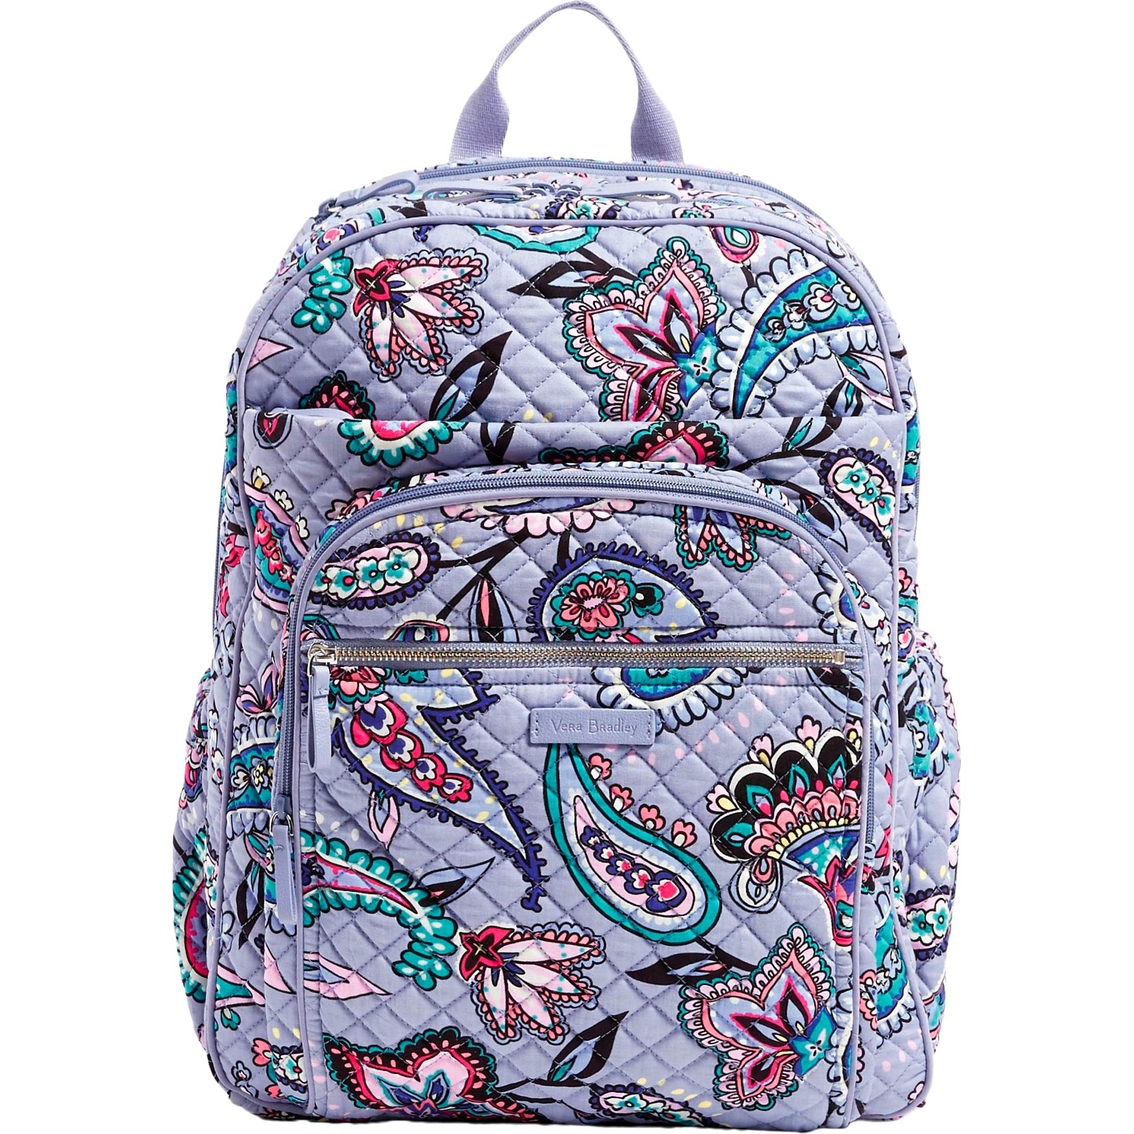 Can You Wash Vera Bradley Backpacks In The Washer Vera Bradley Xl Campus Backpack Kona Paisley Backpacks Back To School Shop Shop The Exchange